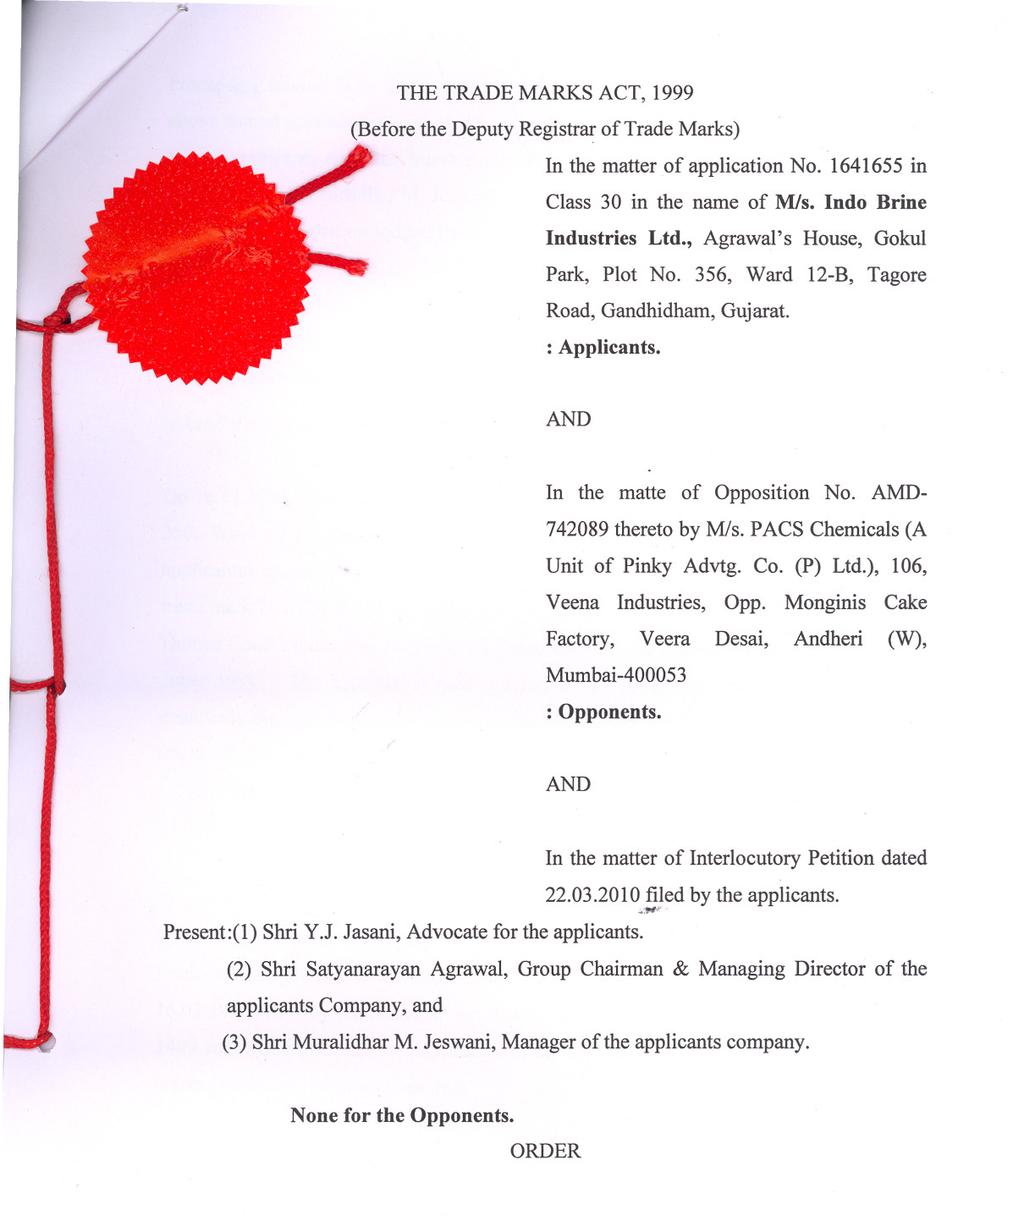 THE TRADE MARKS ACT, 1999 (Before the Deputy Registrar of Trade Marks) In the matter of application No. 1641655 in Class 30 in the name of MIs. Indo Brine Industries Ltd.